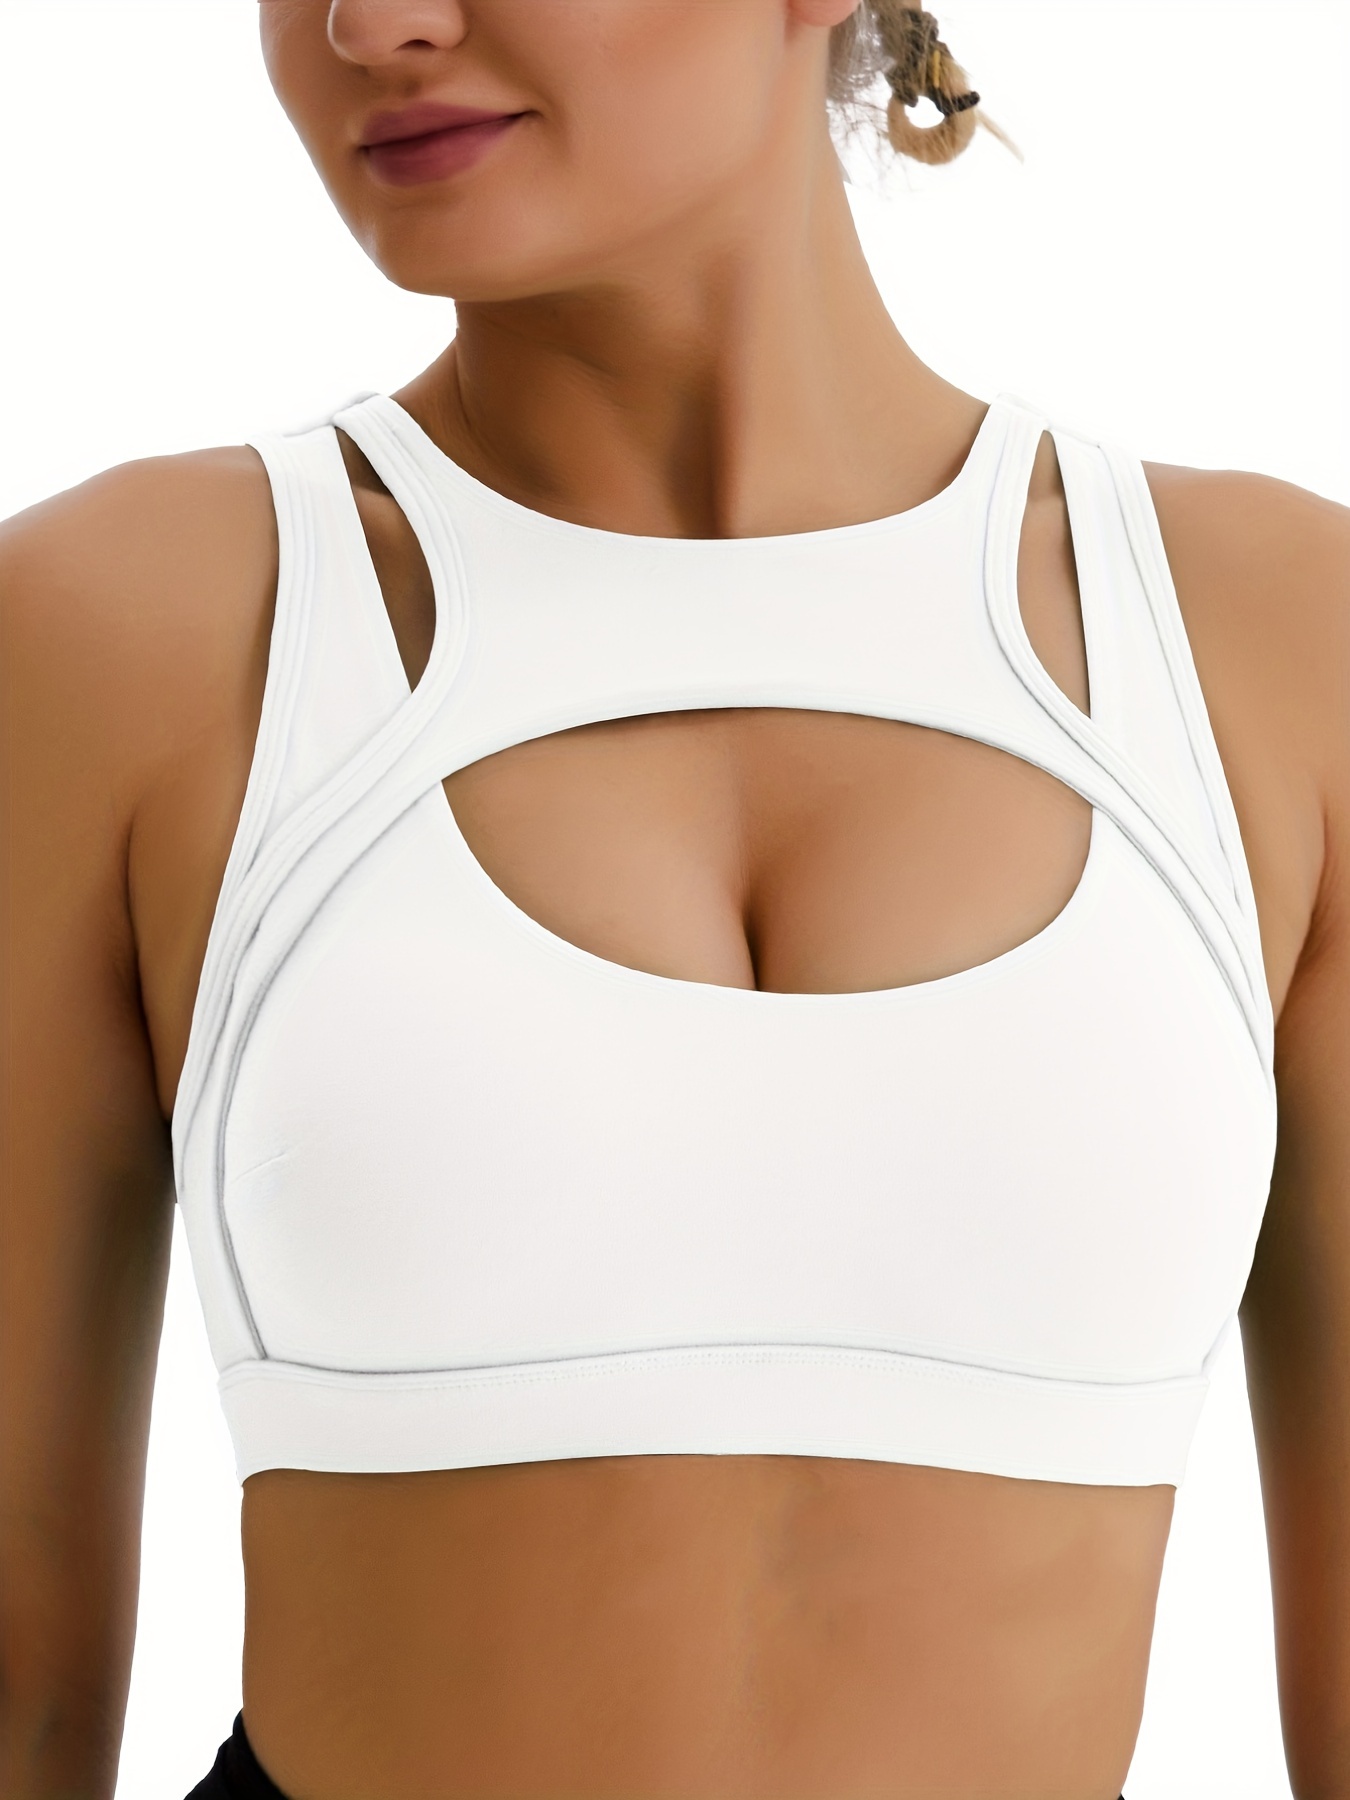 4pcs Wireless Push-up Sports Bra For Women, Great For Backless Outfits